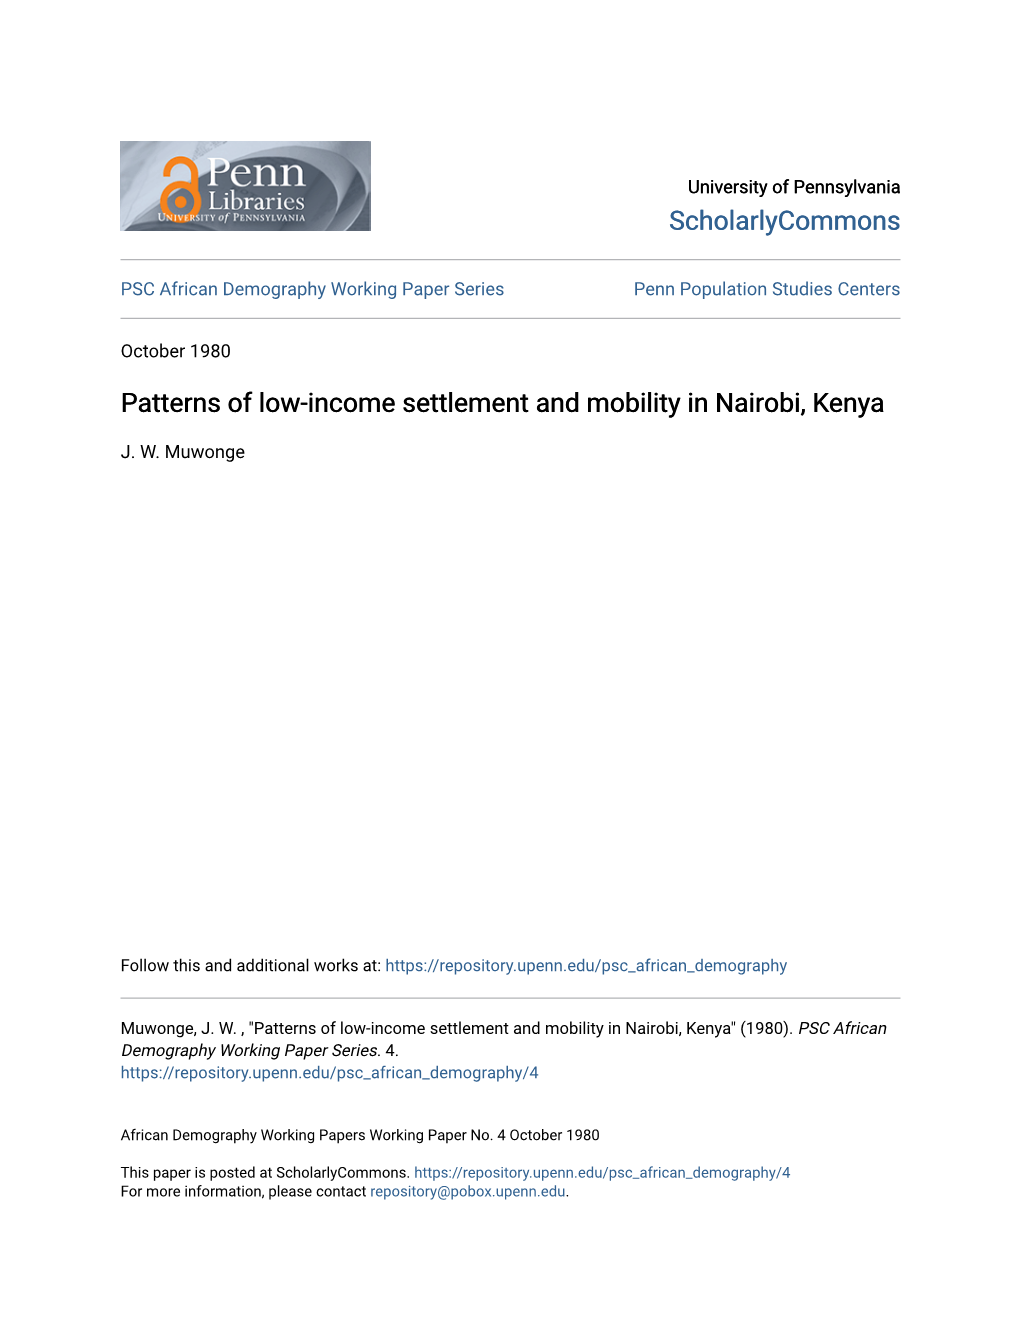 Patterns of Low-Income Settlement and Mobility in Nairobi, Kenya